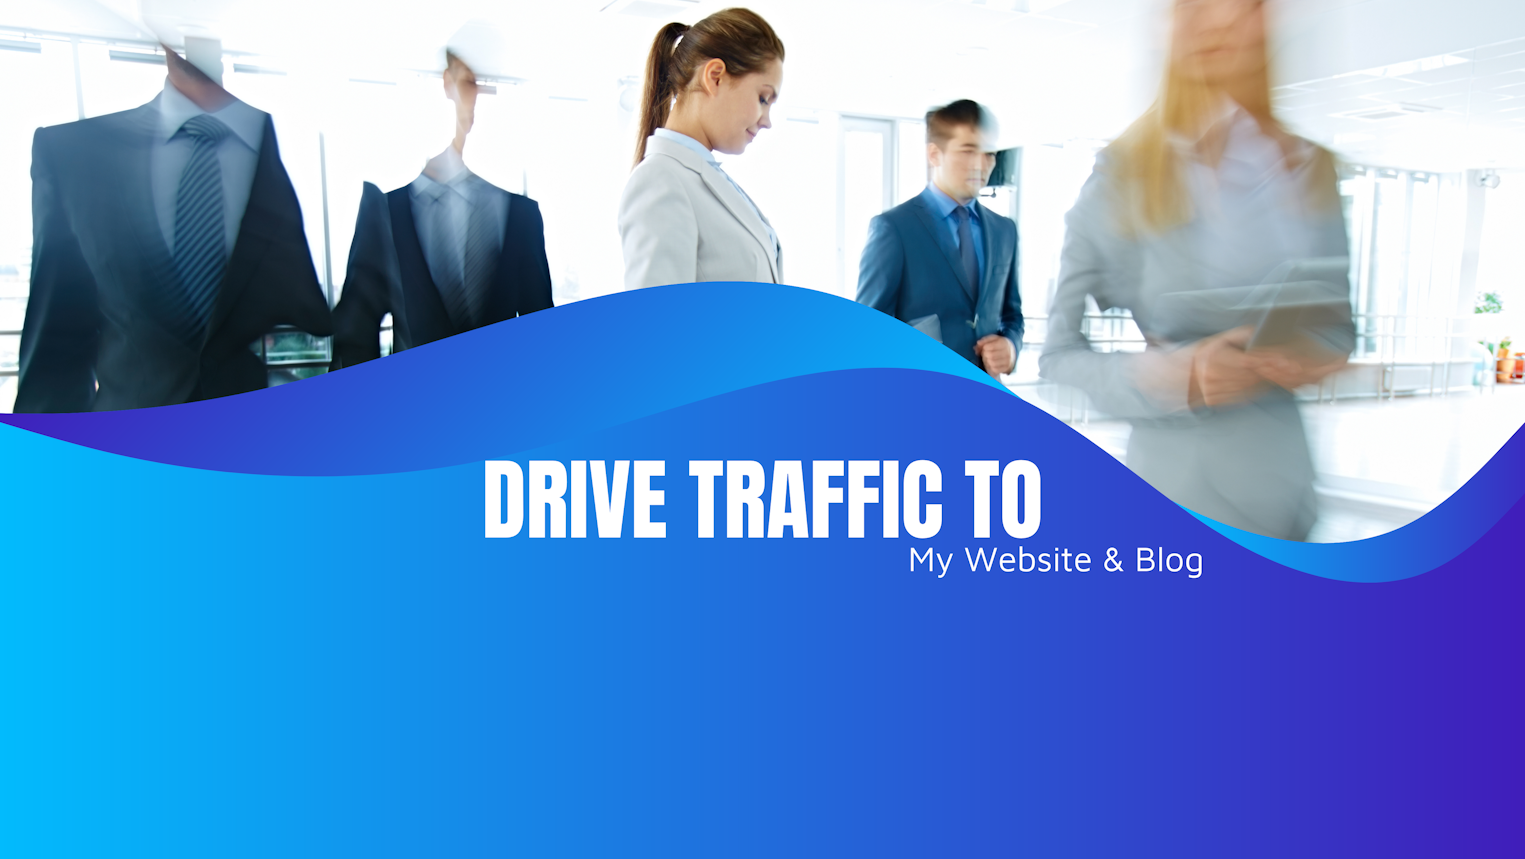 Cover Image for Business Online Training Courses - Targeted Visitors